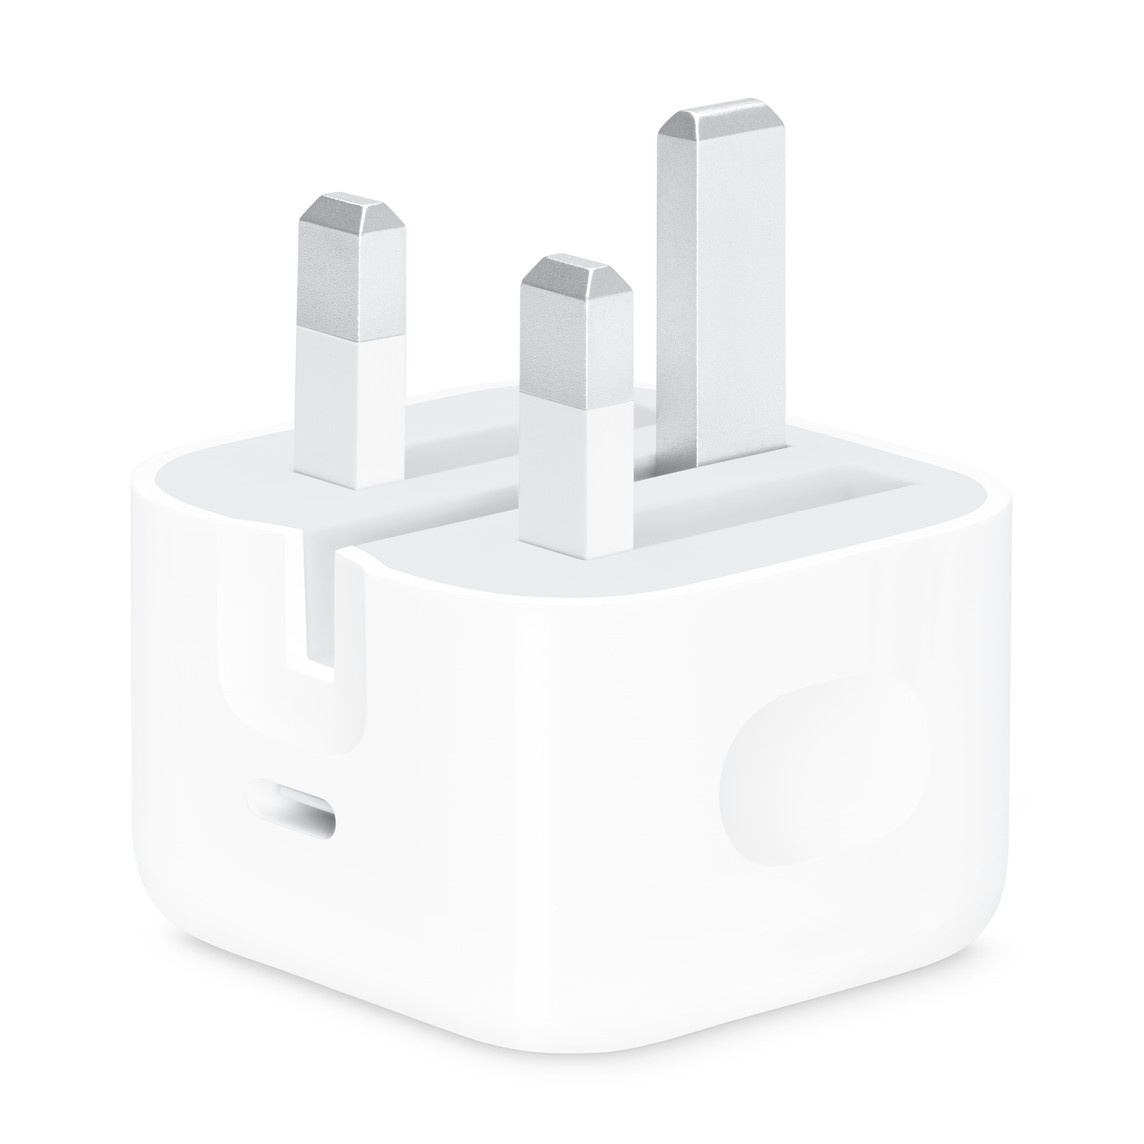 The Apple 20 watt USB‑C Power Adapter (with Type G plug) offers fast, efficient charging at home, in the office, or on the go.